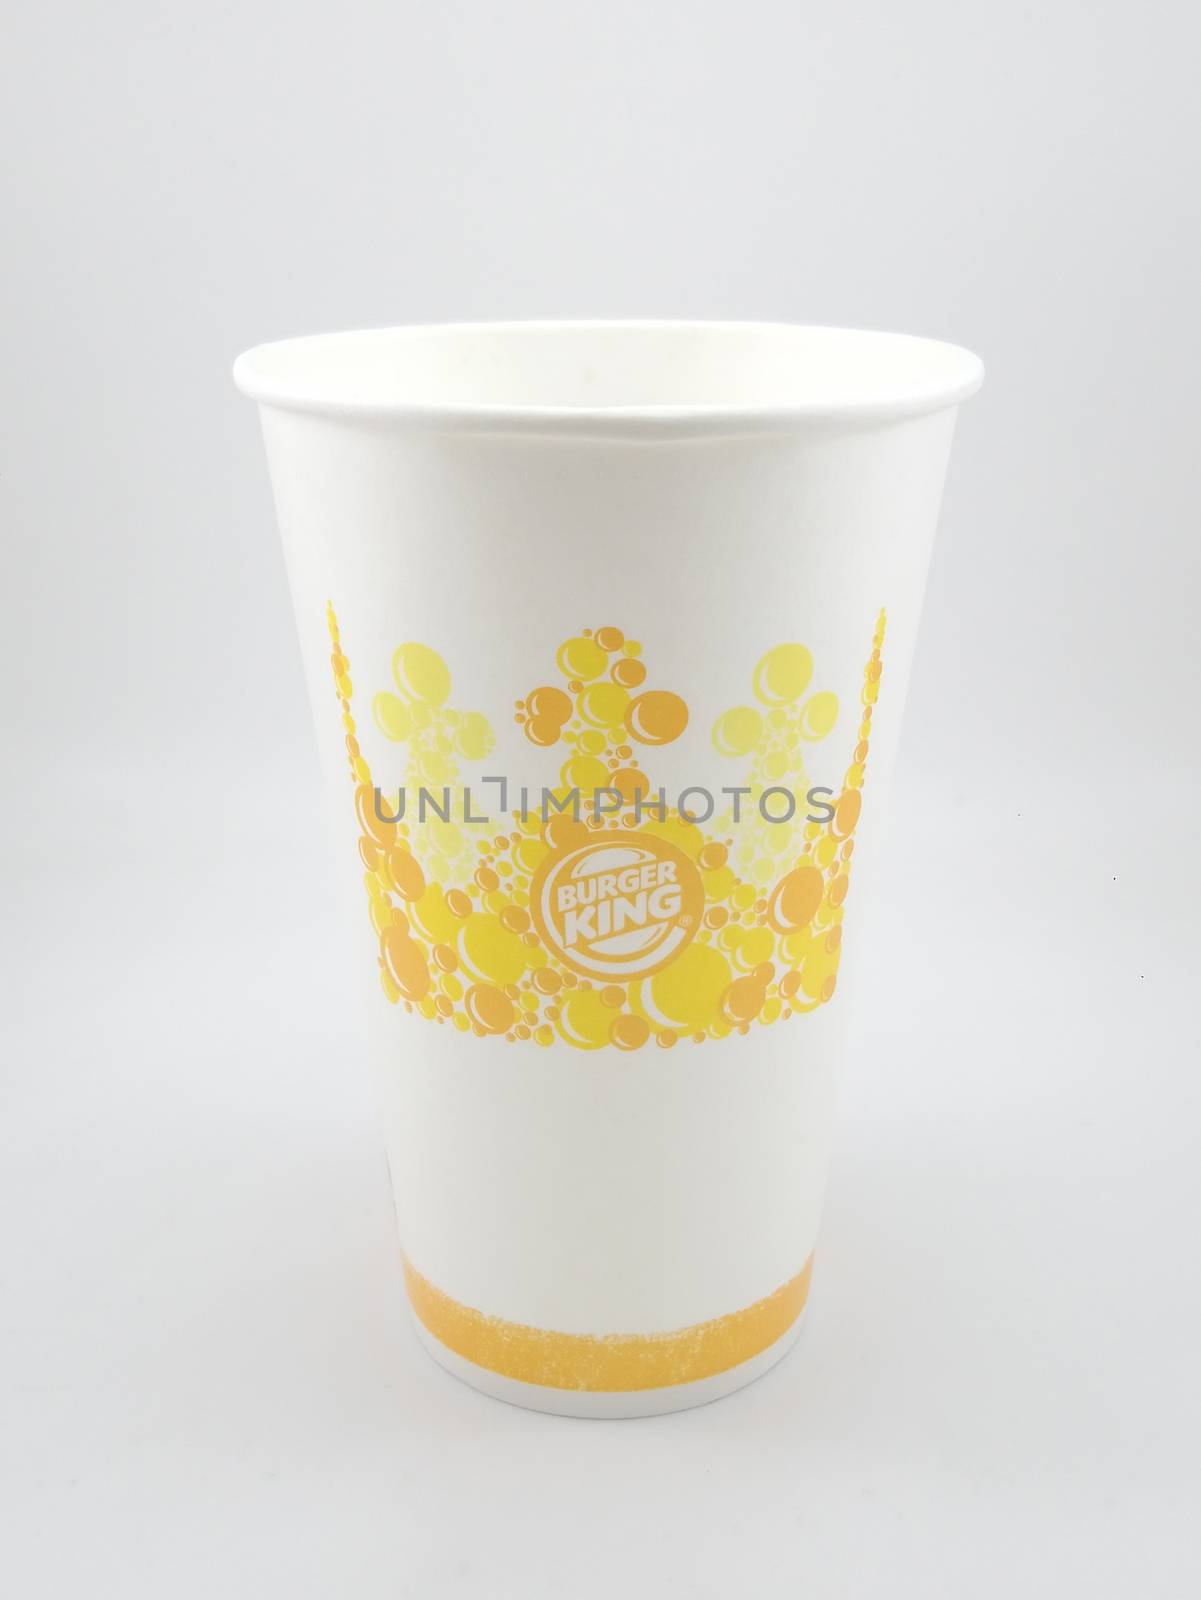 Burger king drinking cup in Manila, Philippines by imwaltersy